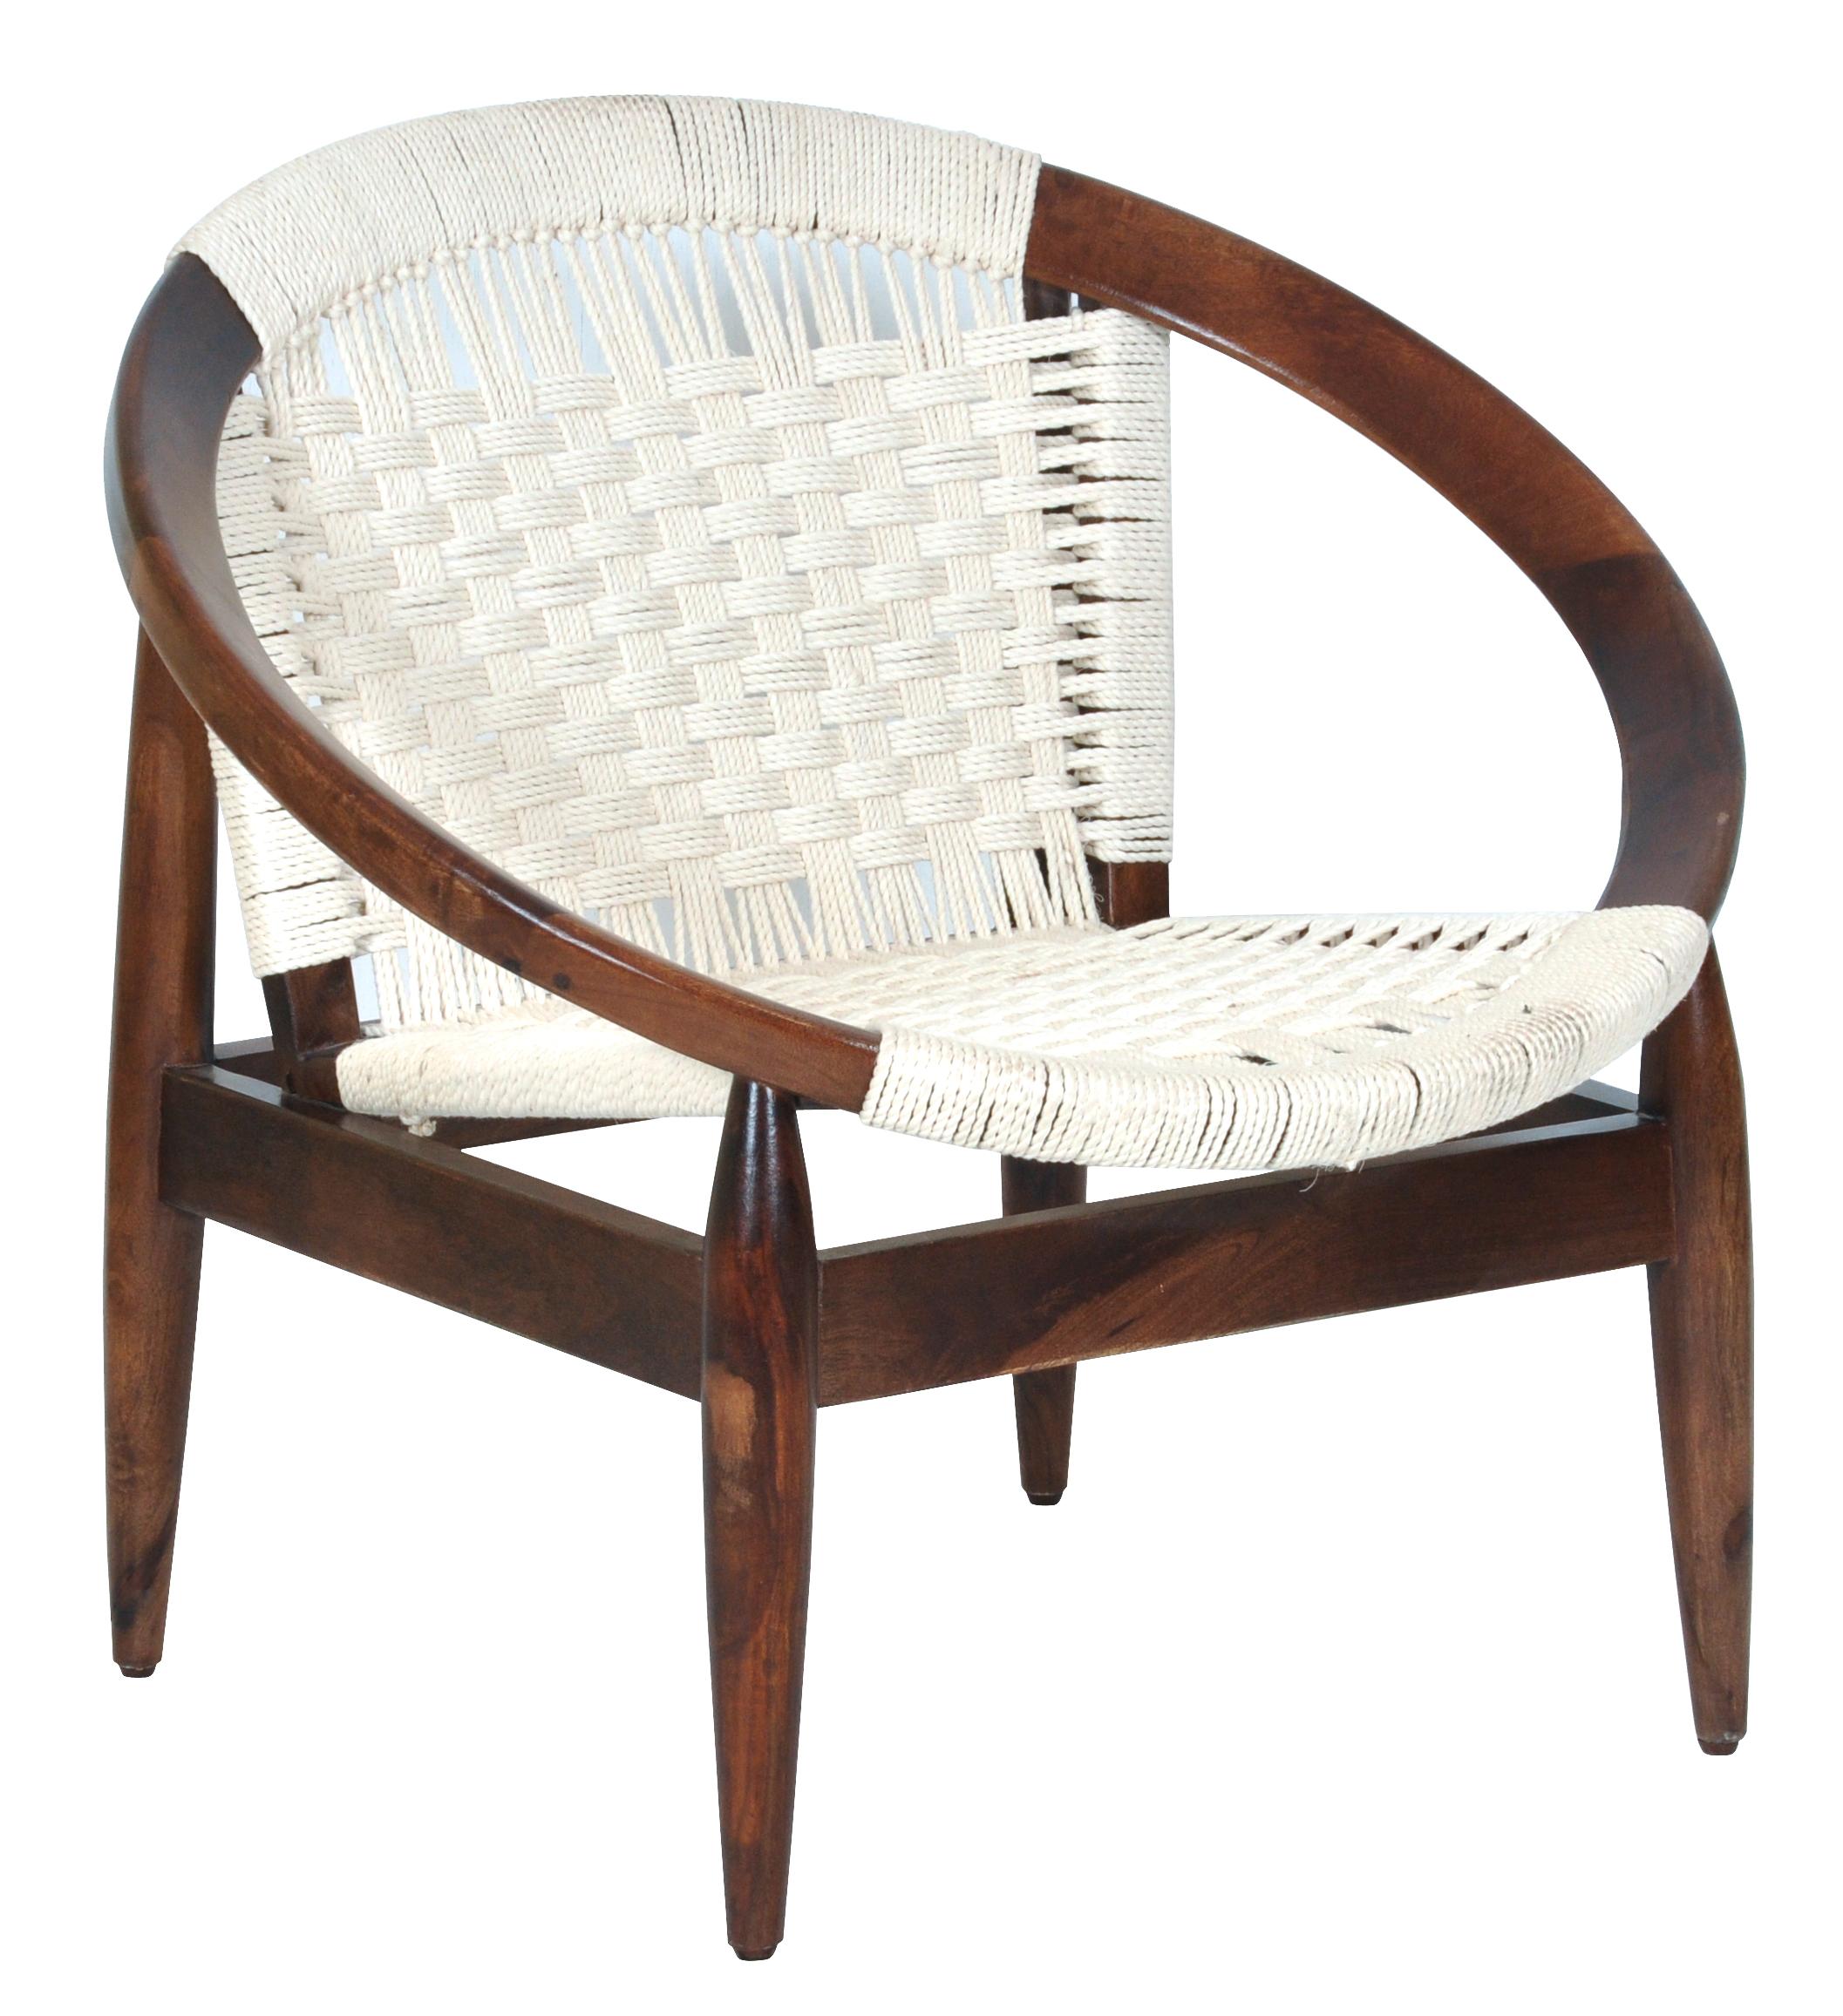 Transitional Chair CAC-51052 Peraza CAC-51052 in Walnut, White Polyester